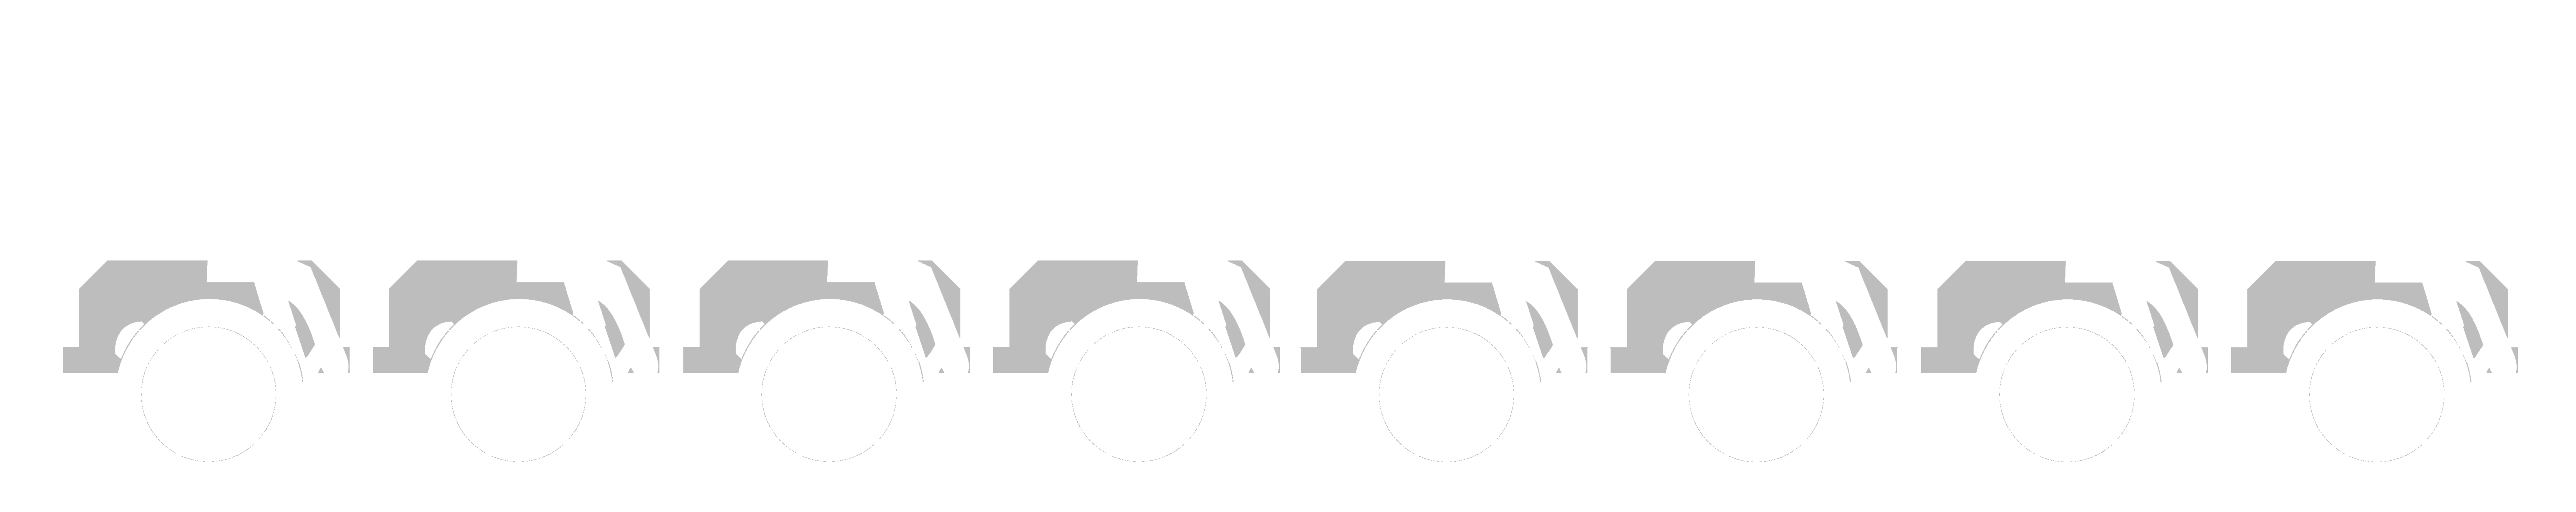 Moving over dimensional  and heavy haul cargo | Heavy Haul Cargo